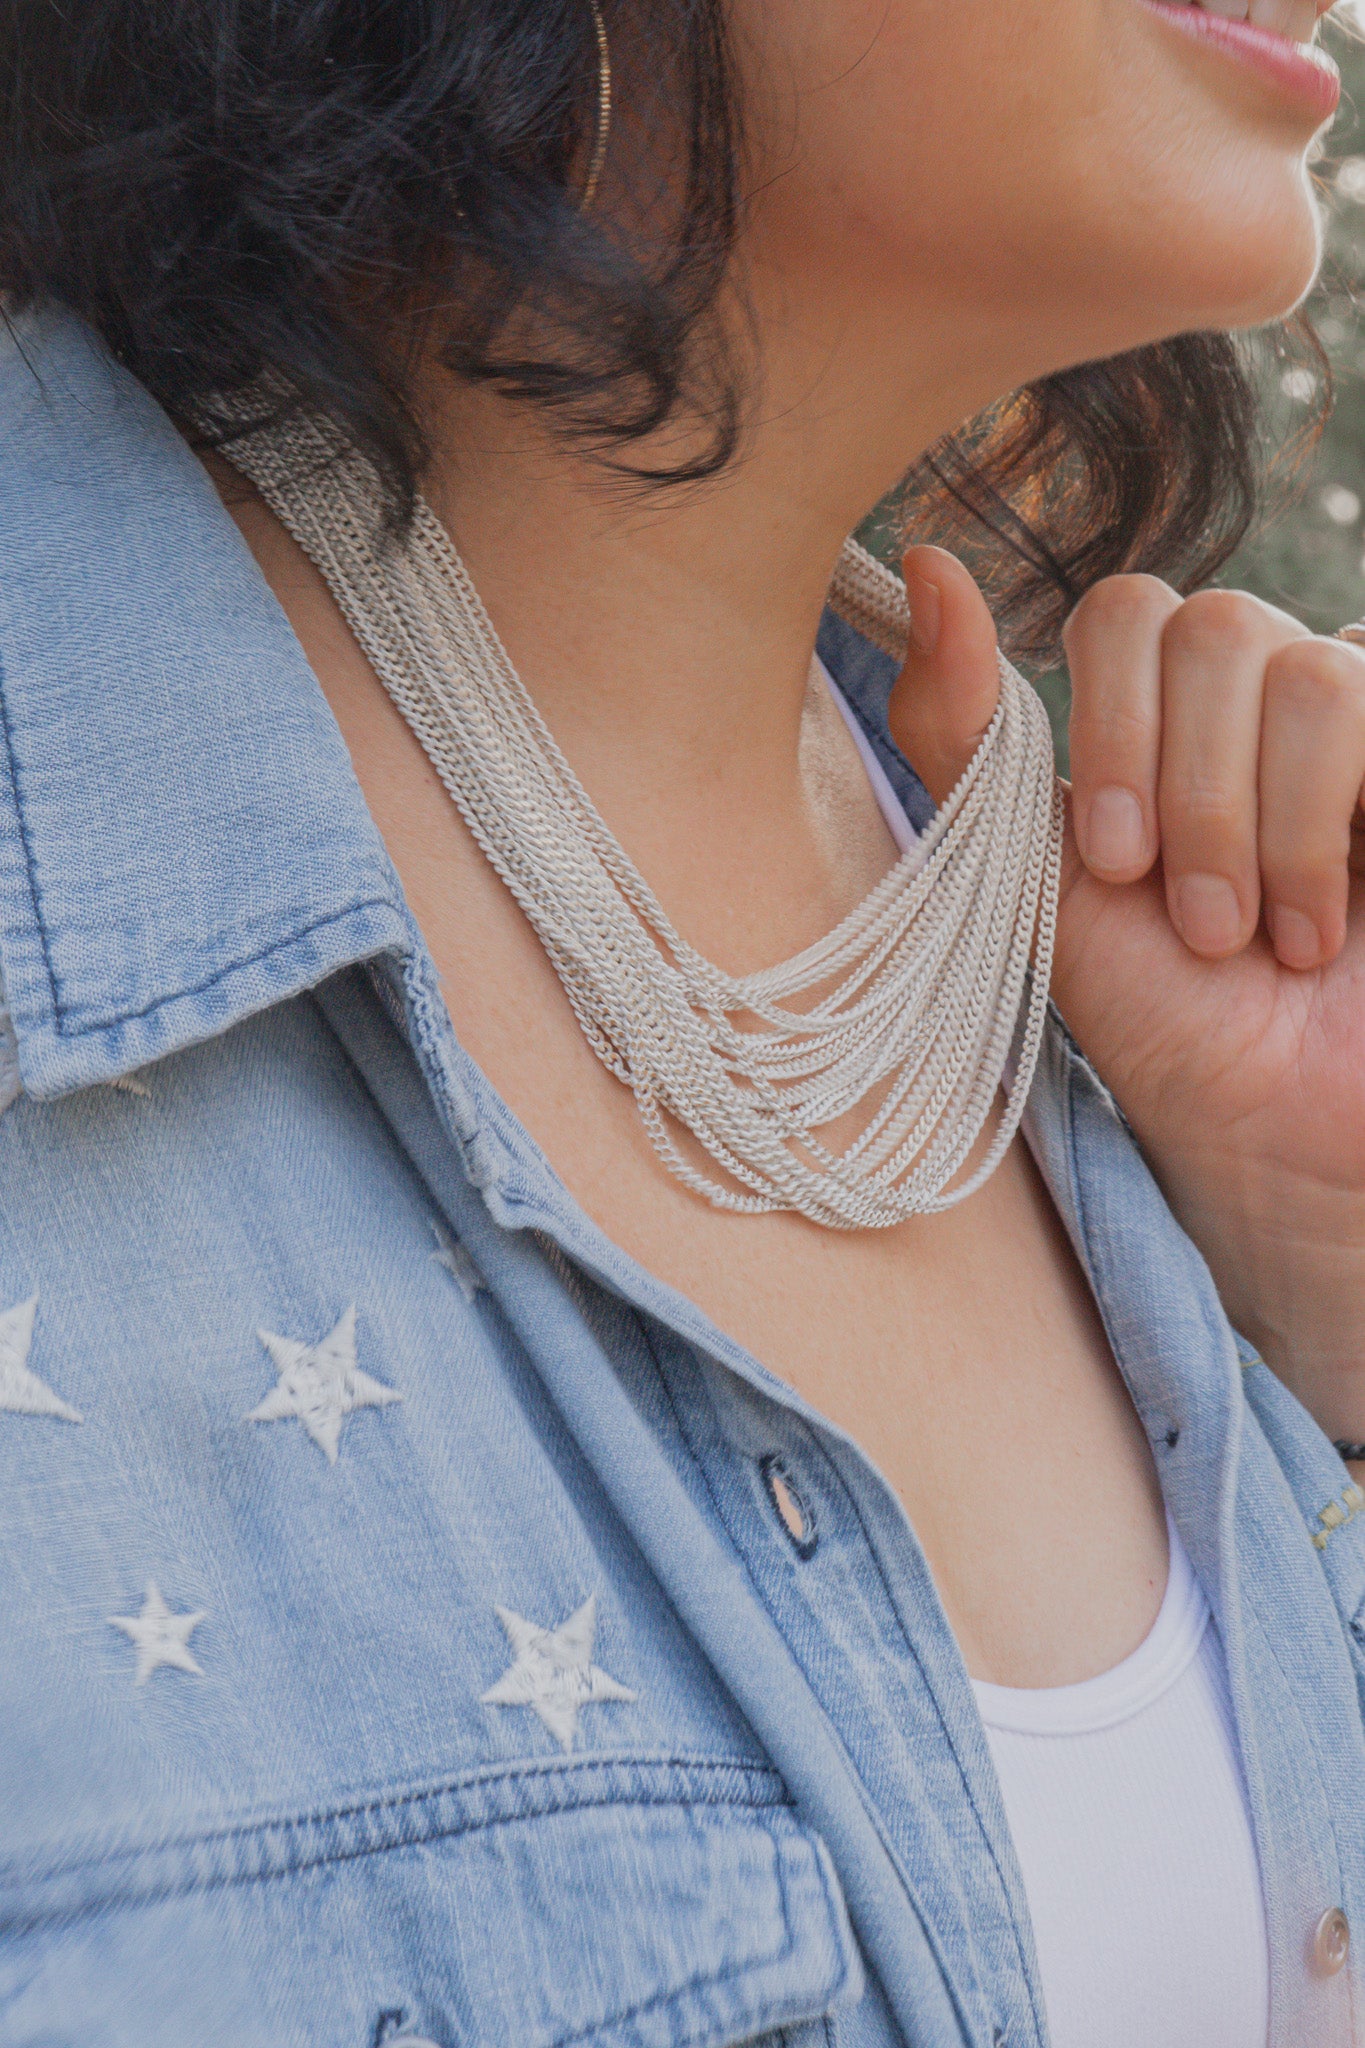 Side view of the model wearing the Ocean Waves Chain Necklace. Color is silver. Model is holding the necklace